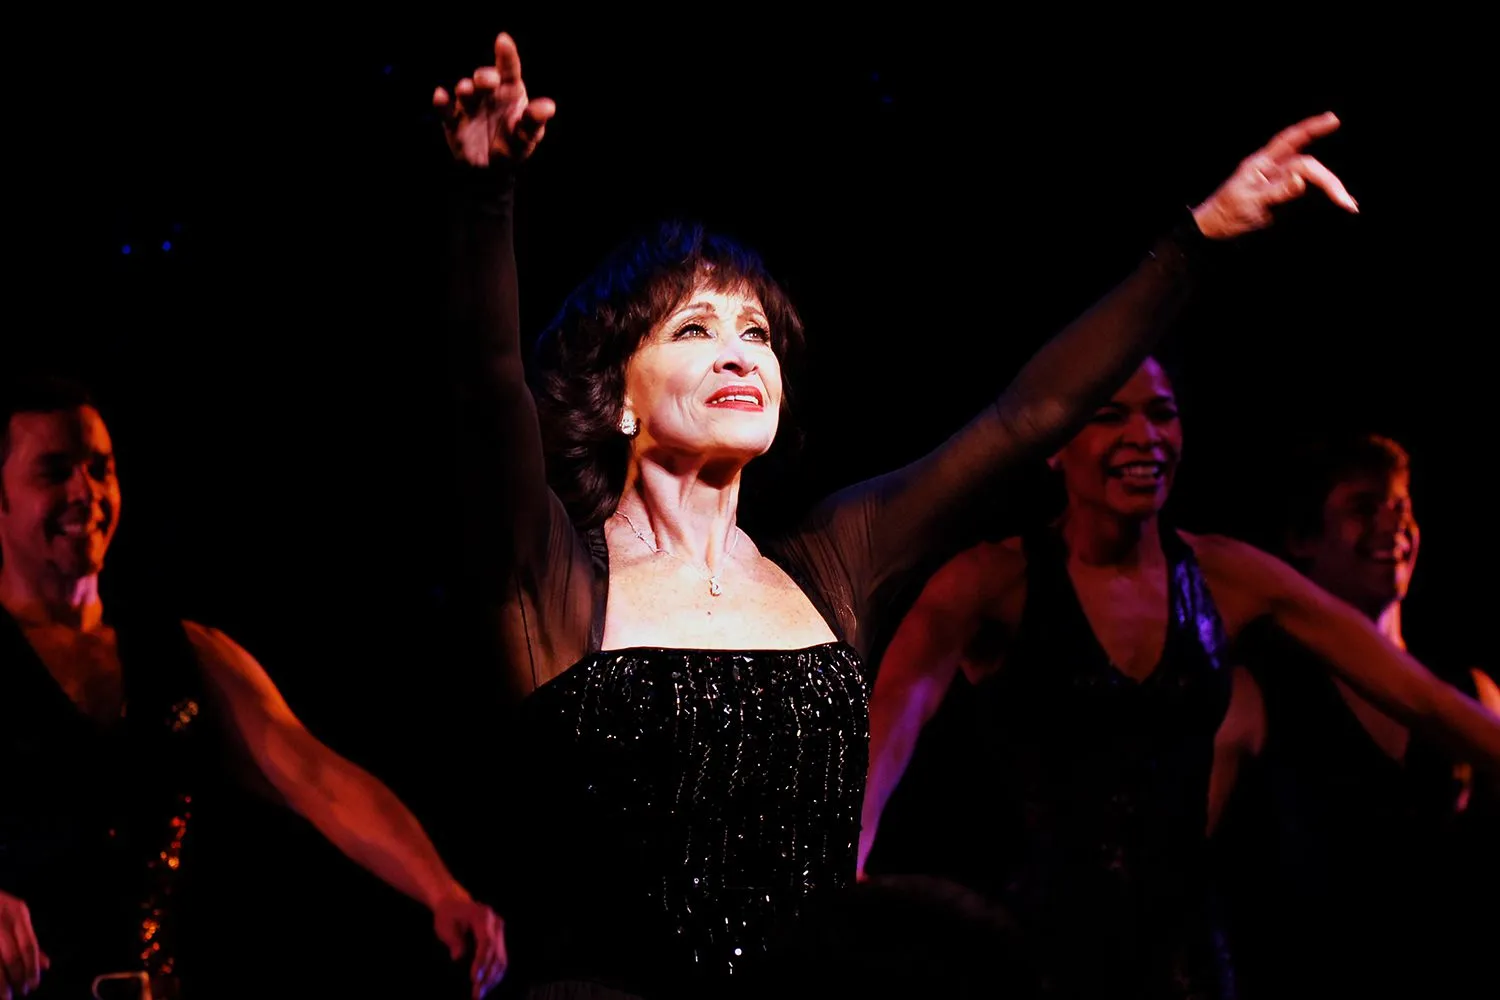 broadway-icon-chita-rivera-presidential-medal-of-freedom-recipient-dies-at-91